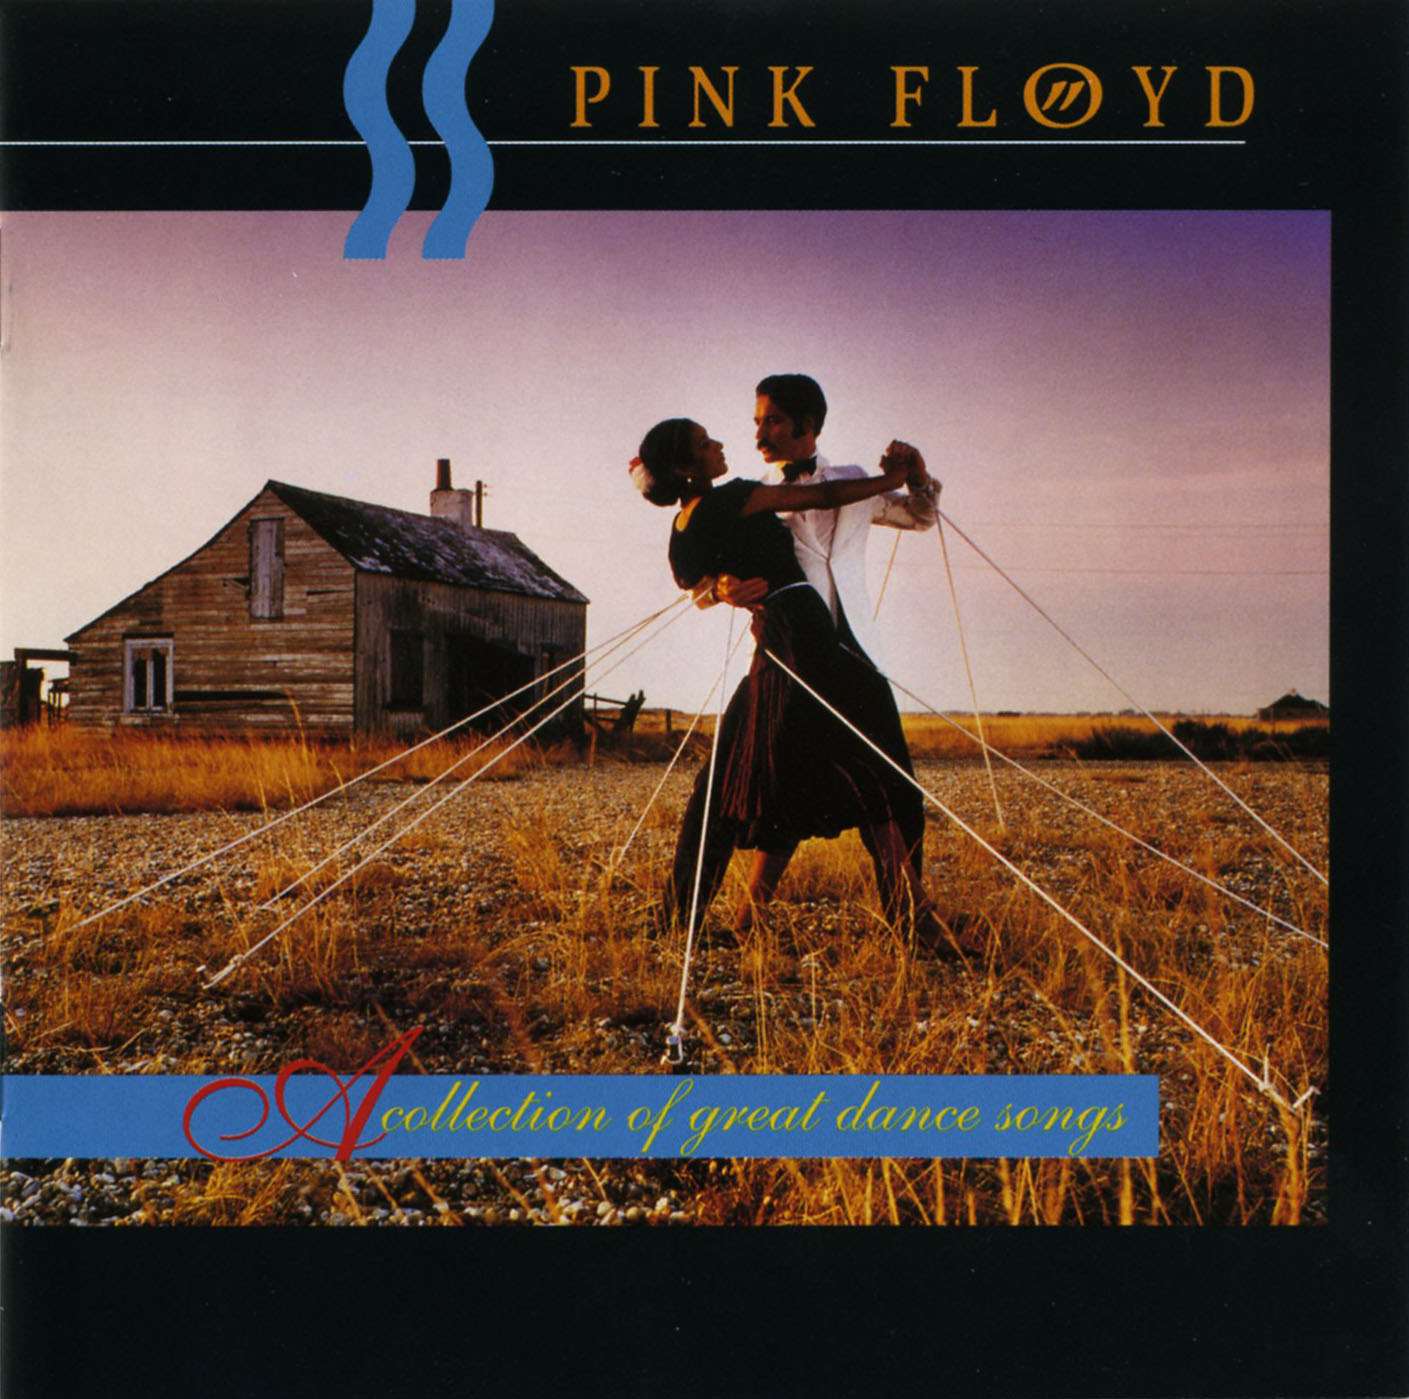 The Pink Floyd album A Collection of Great Dance Songs